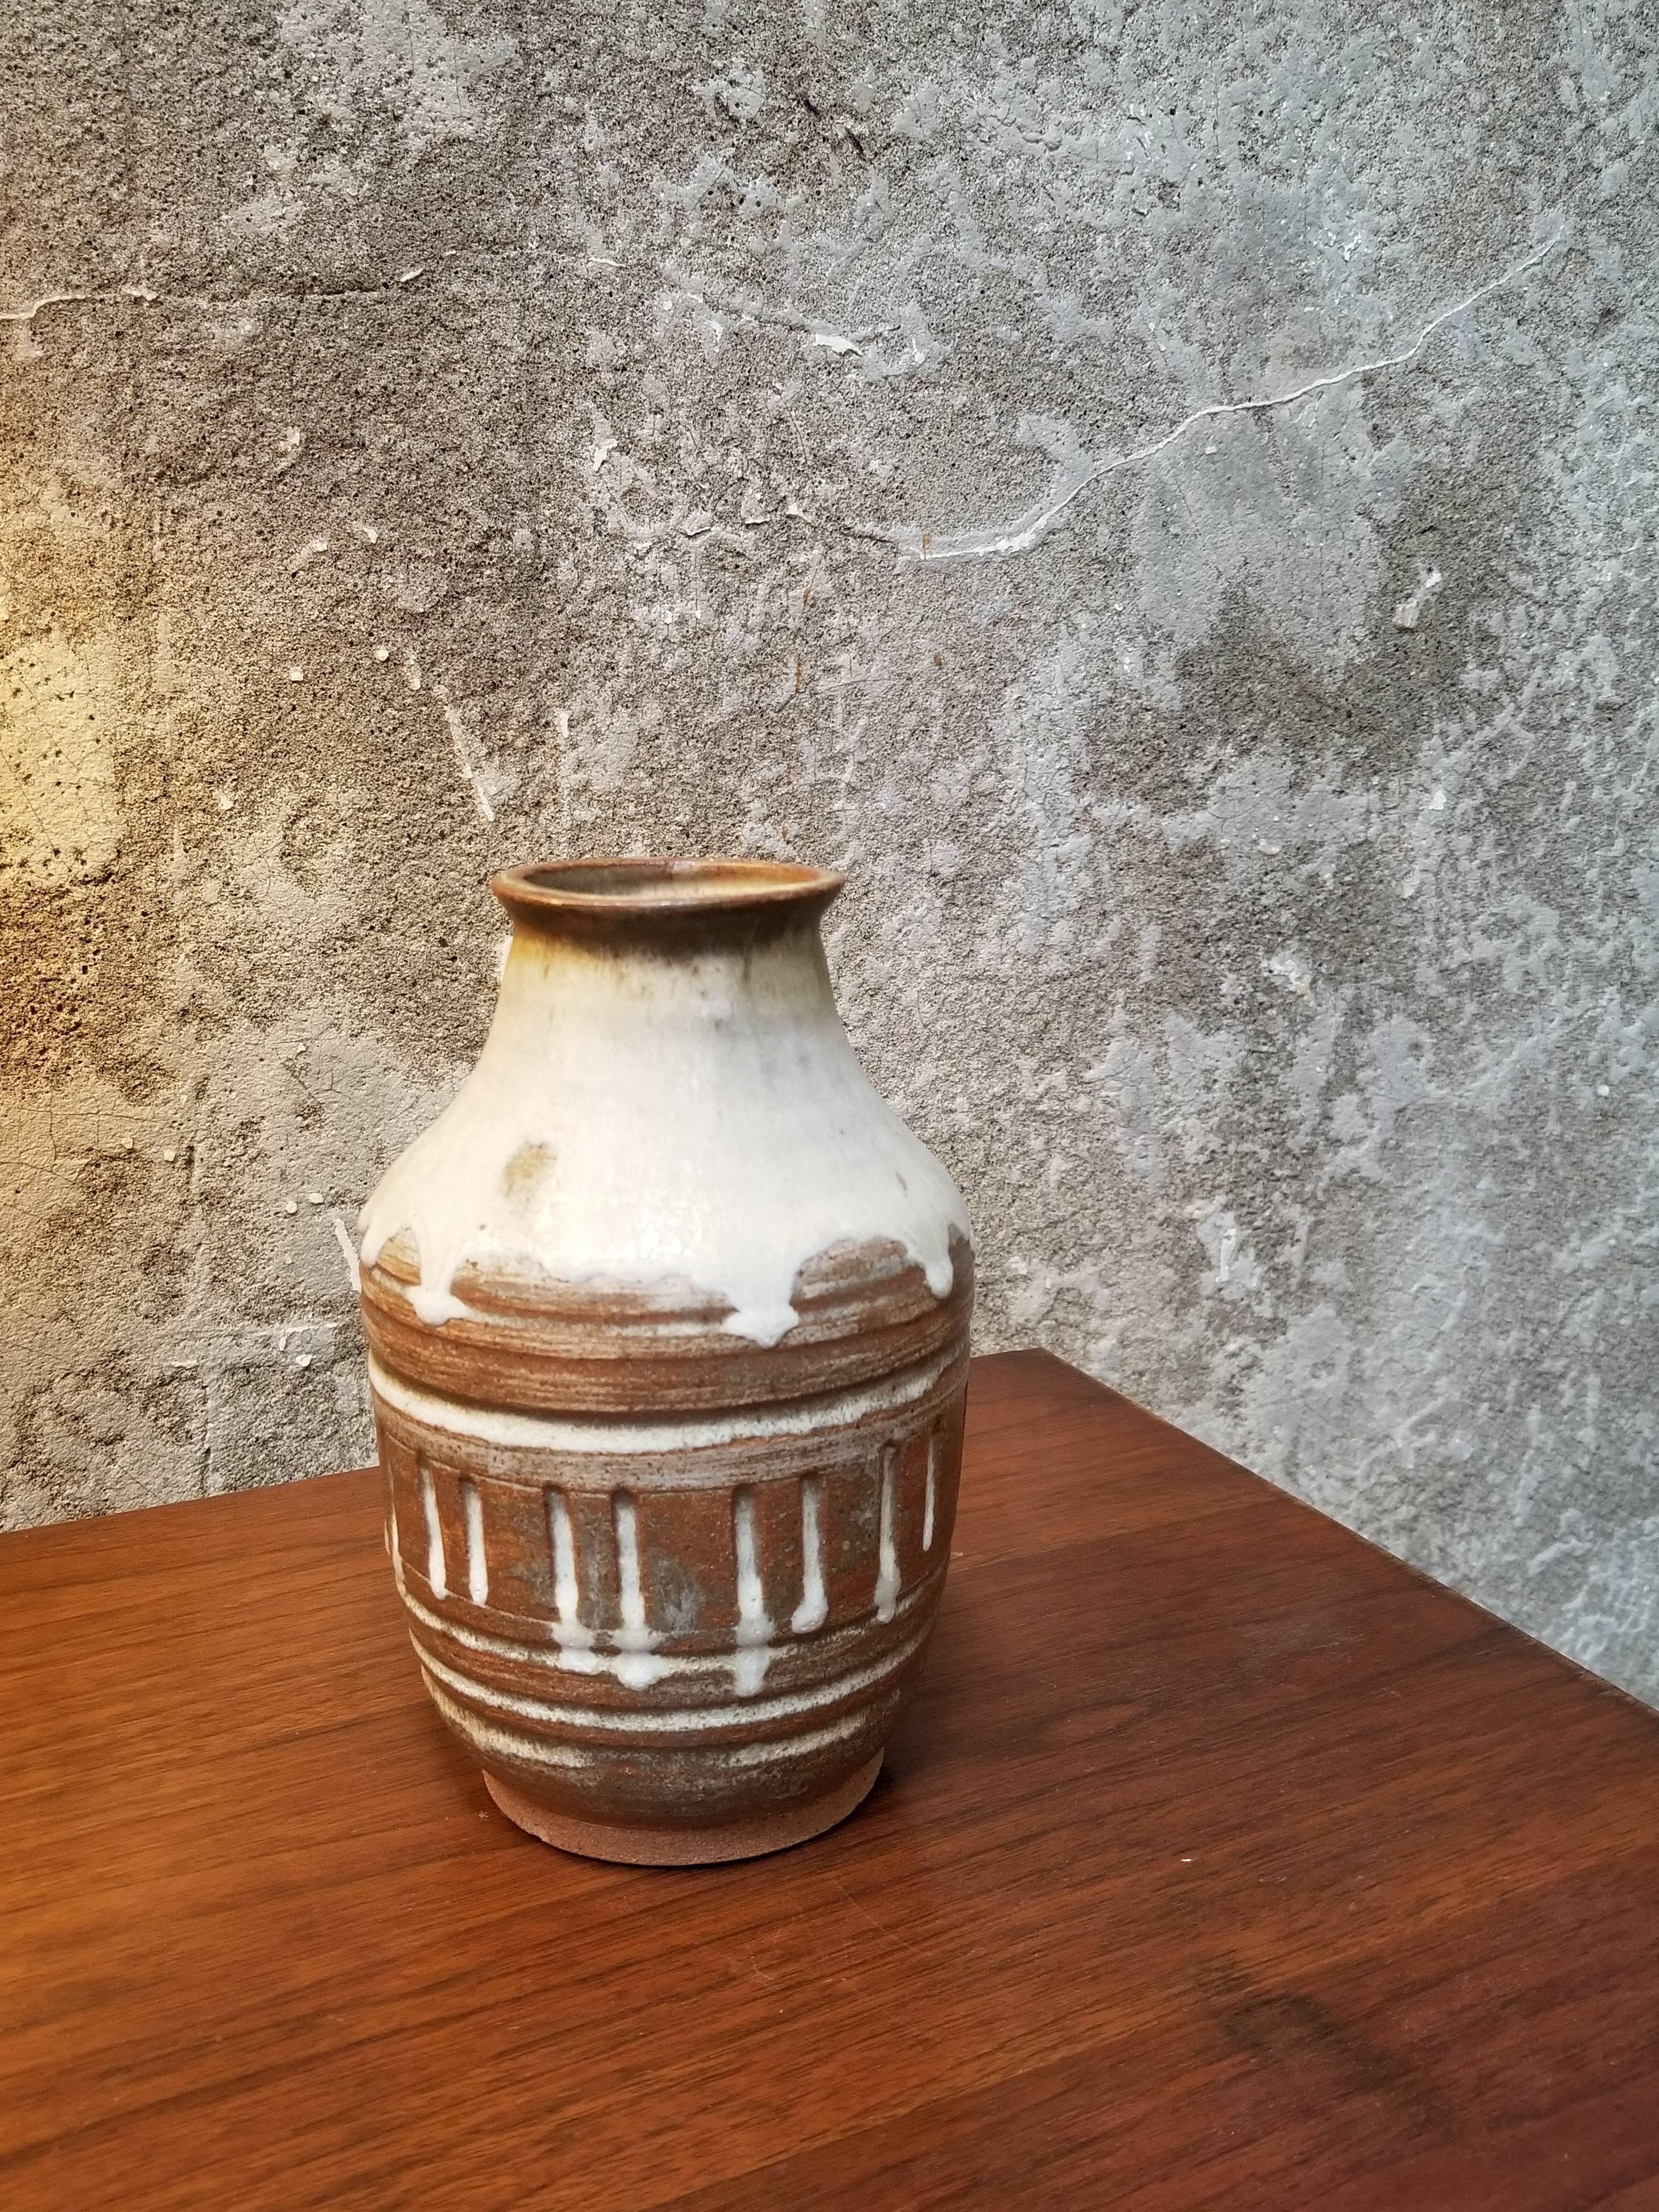 A pottery vase by San Francisco artist Herman Roderick Volz. Incised with drip glaze. Signed on base.
Painter, muralist, lithographer, set designer and ceramist. Formal training at the Art und Gewerbescule in Zurich and the Academy of Fine Arts,